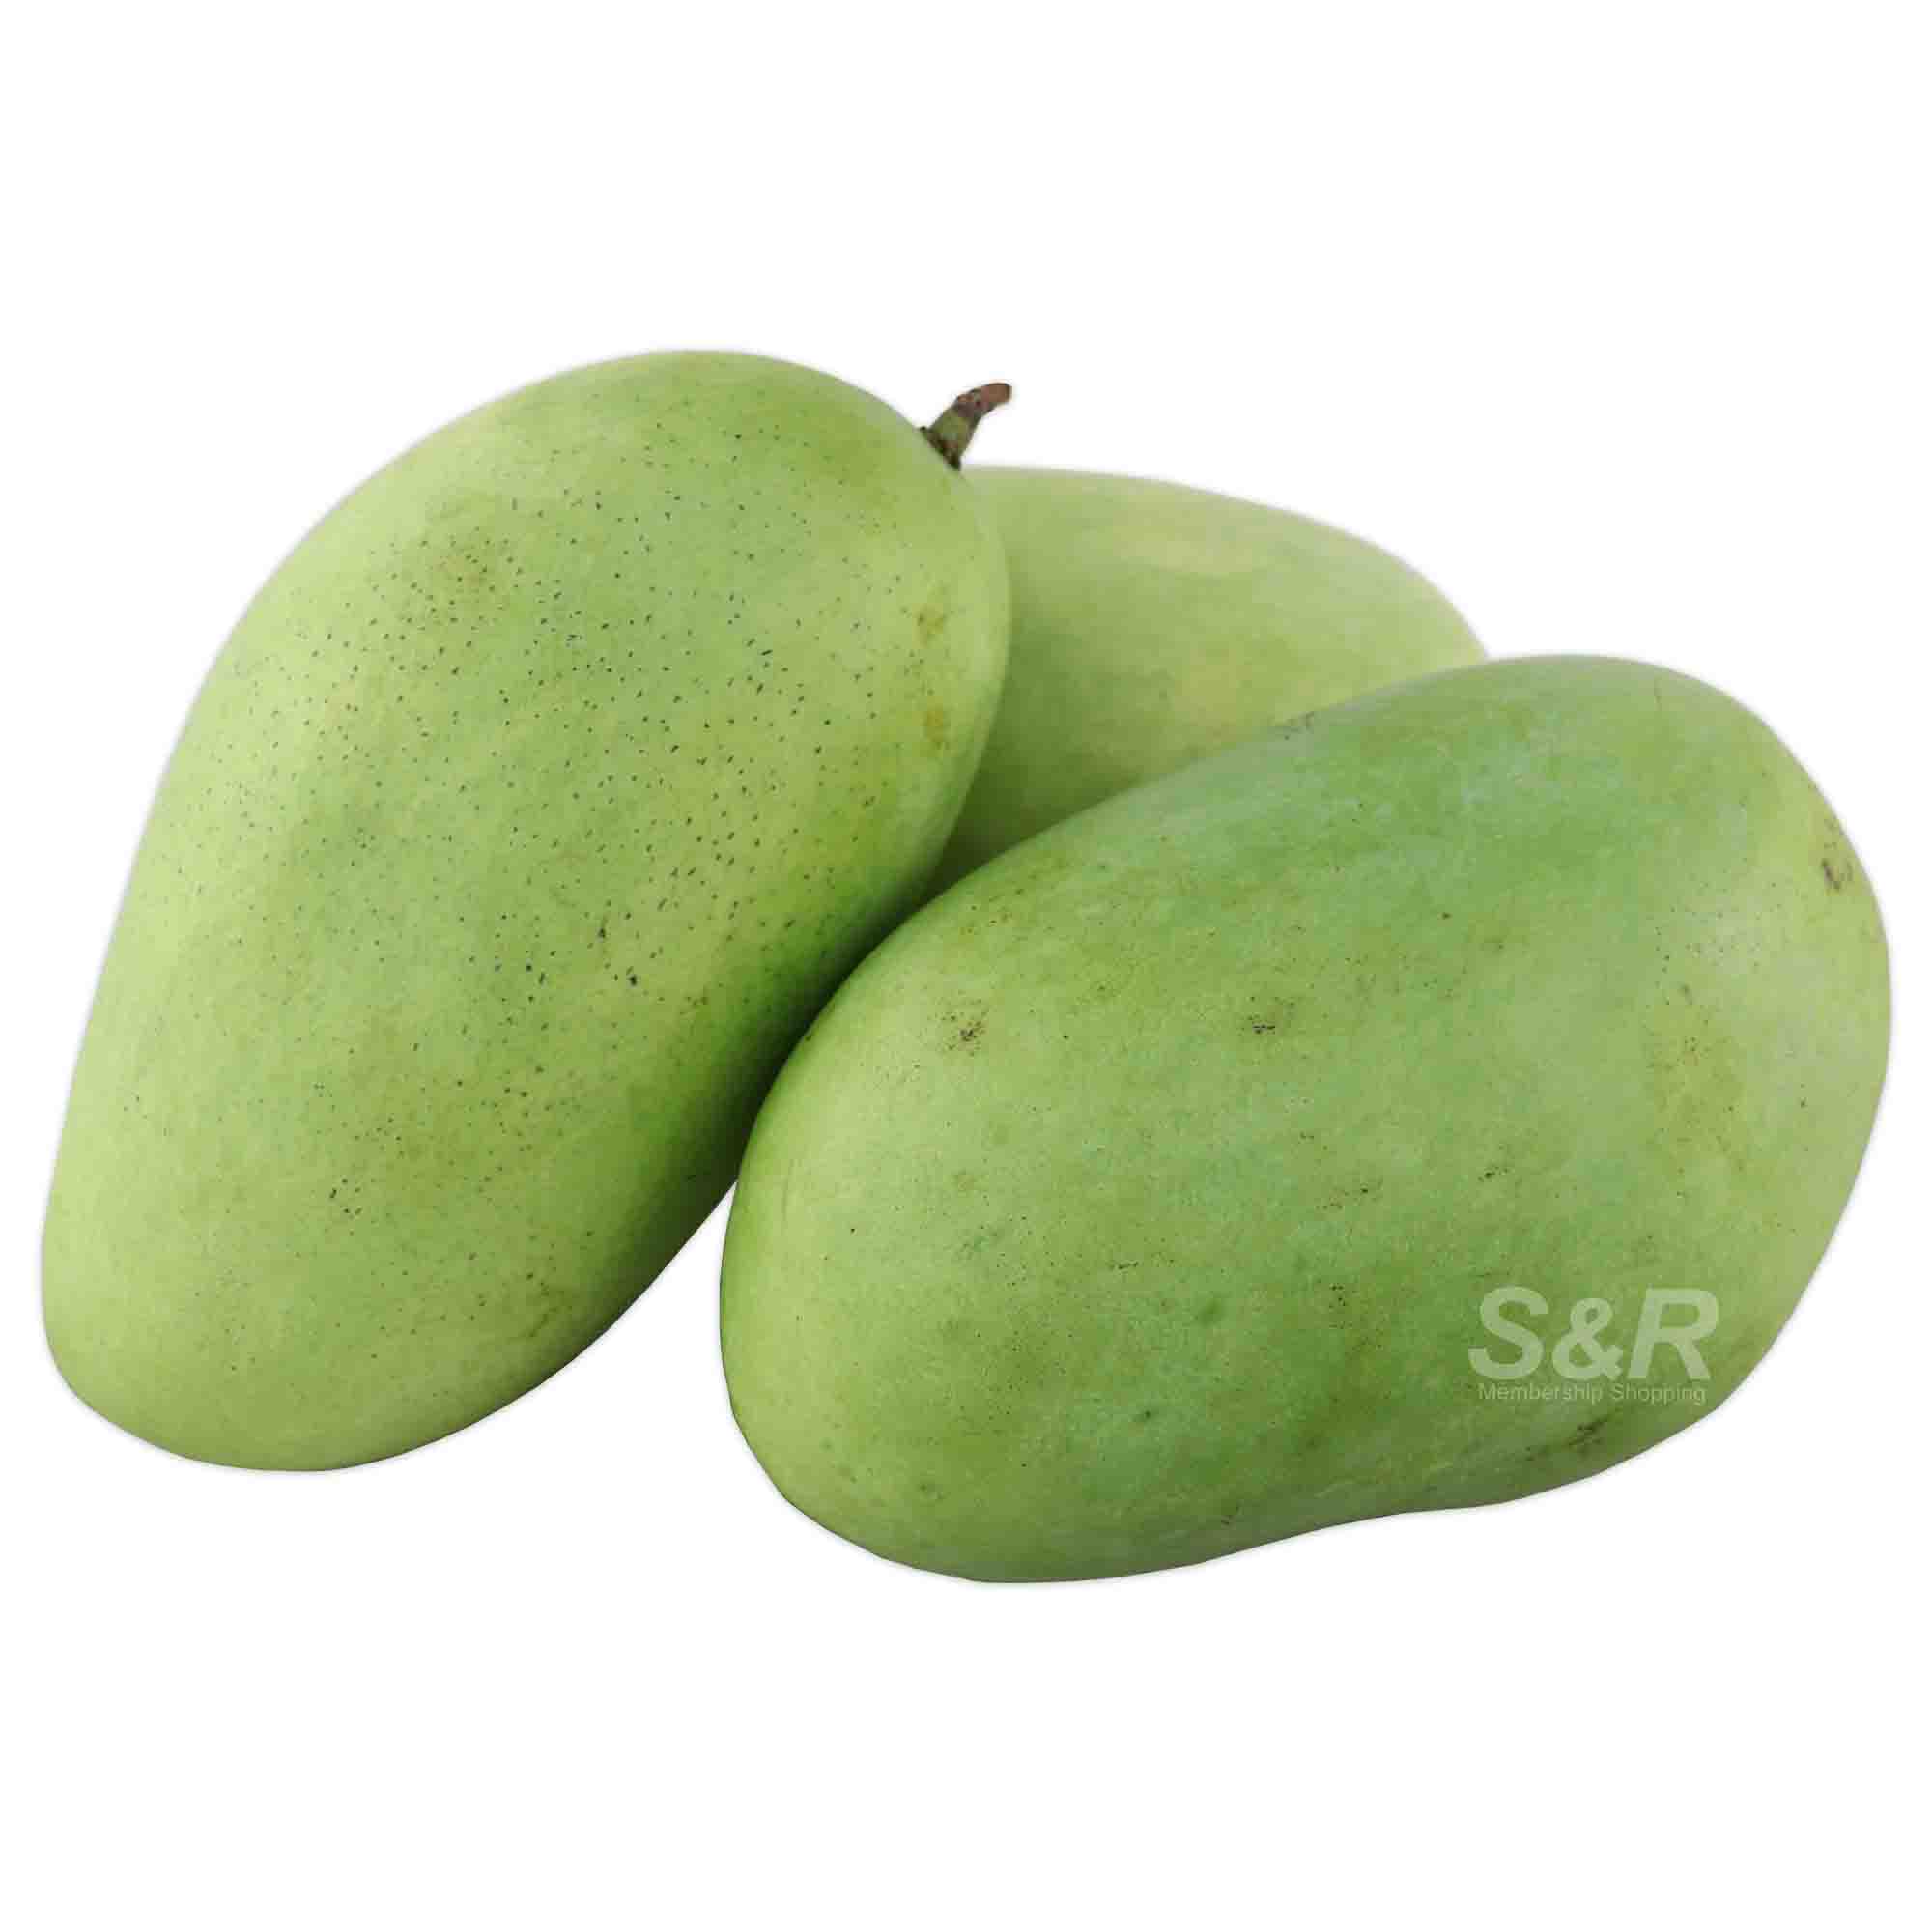 S&R Large Green Mango approx. 1.5kg